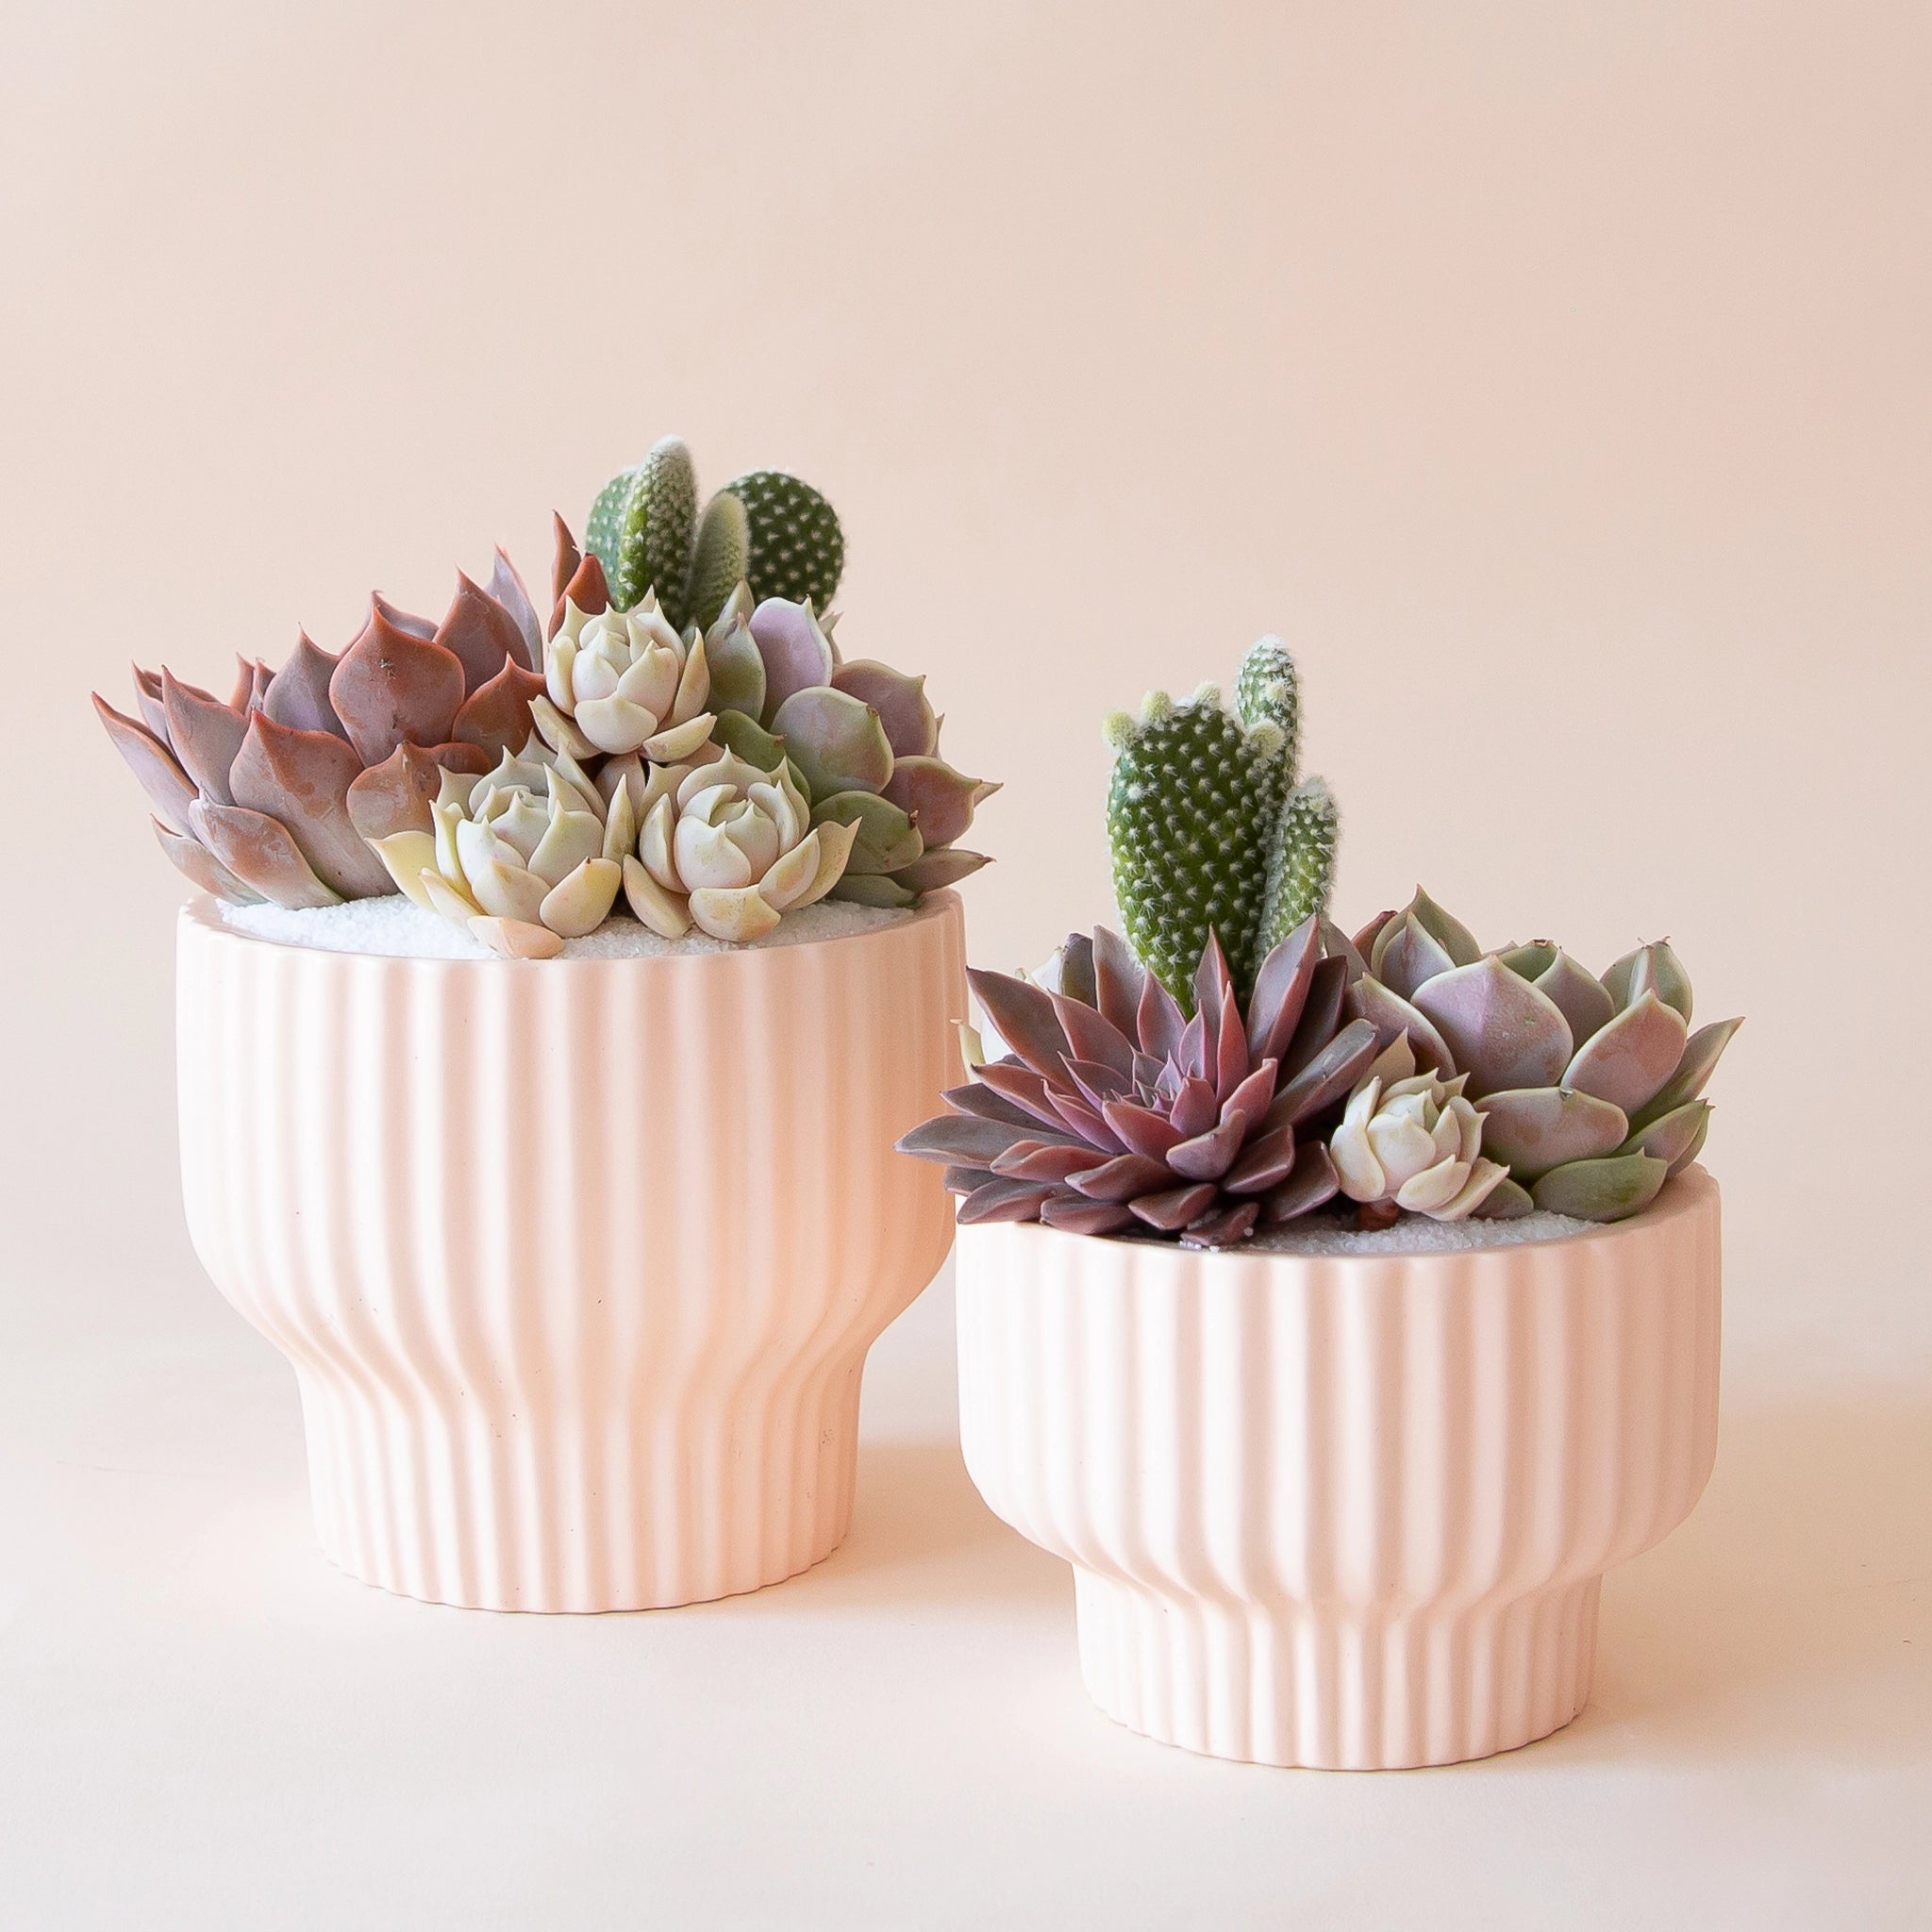 On a tan background is the two sizes of the Presley pedestal pots in the light pink shade filled with cactus and succulent arrangements. 